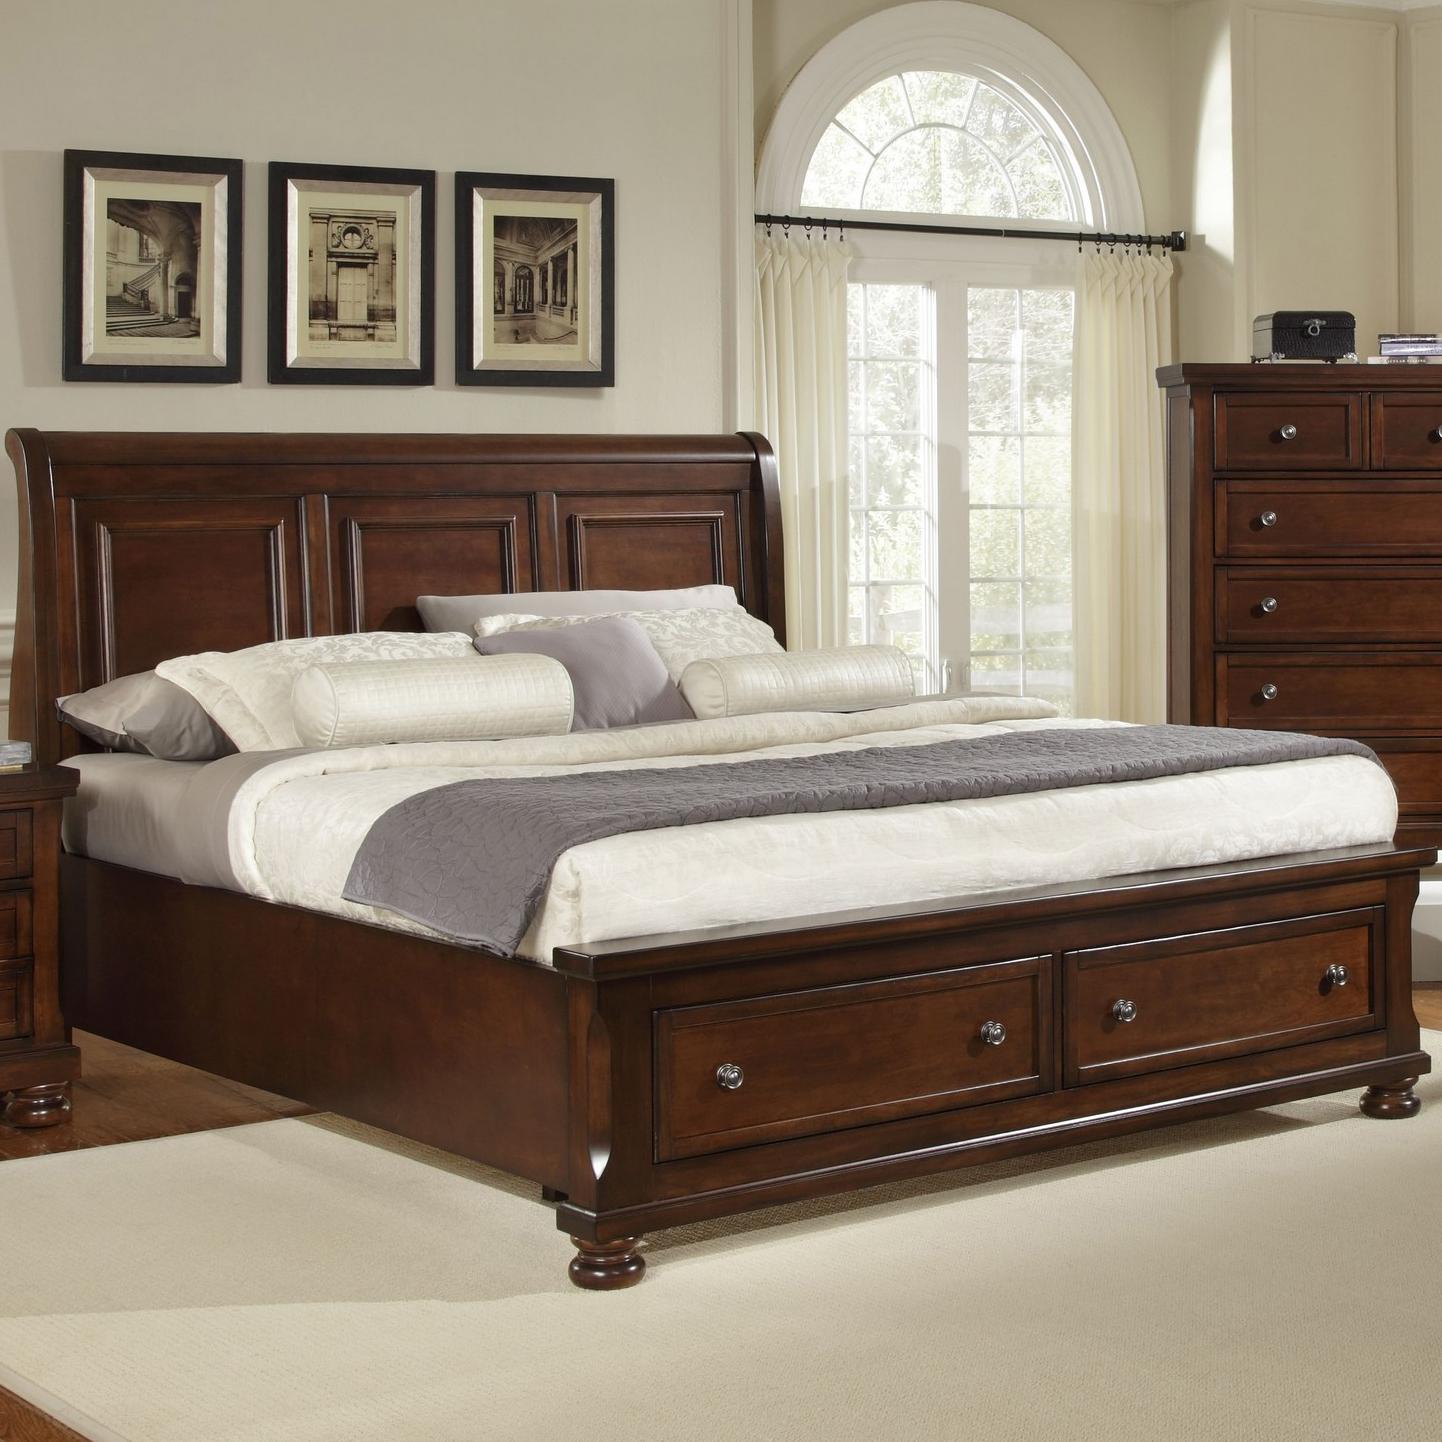 Vaughan Bassett Reflections King Storage Bed With Sleigh Headboard Within Frames  Drawers Decor 19